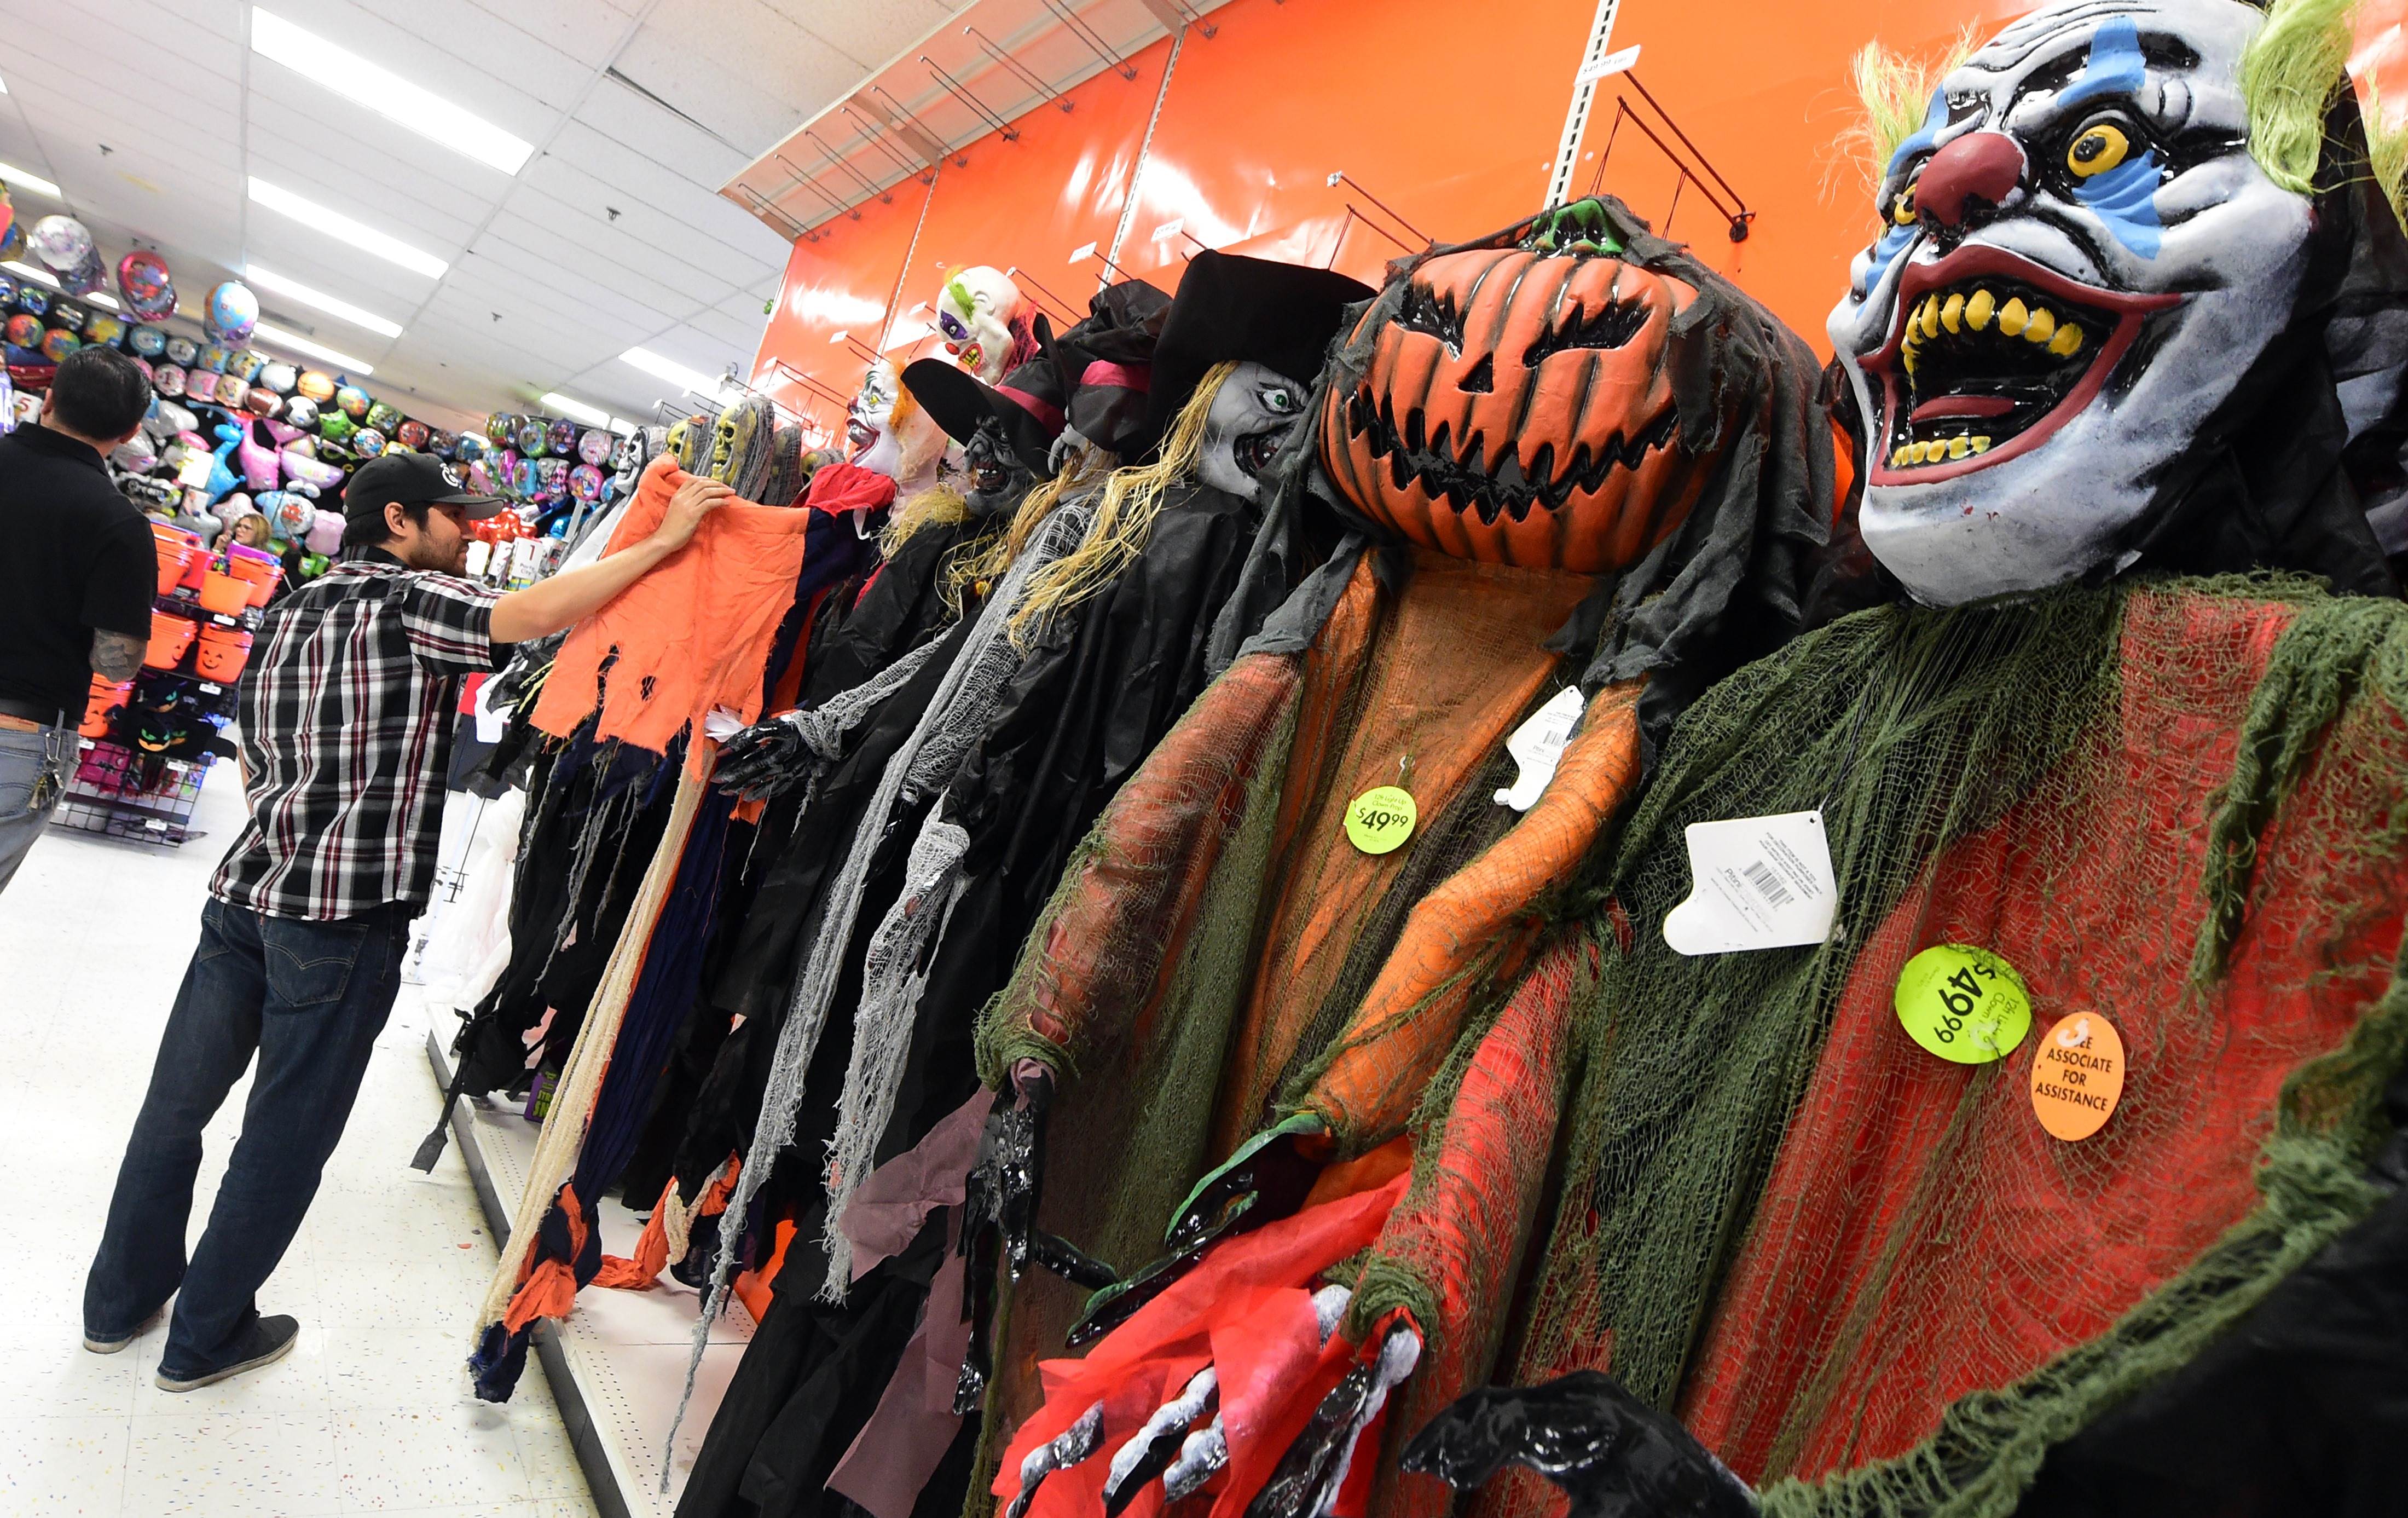 America gets ready to celebrate Halloween, while global stock markets have staged a rally in October after sharp declines in August and September. Photo: AFP